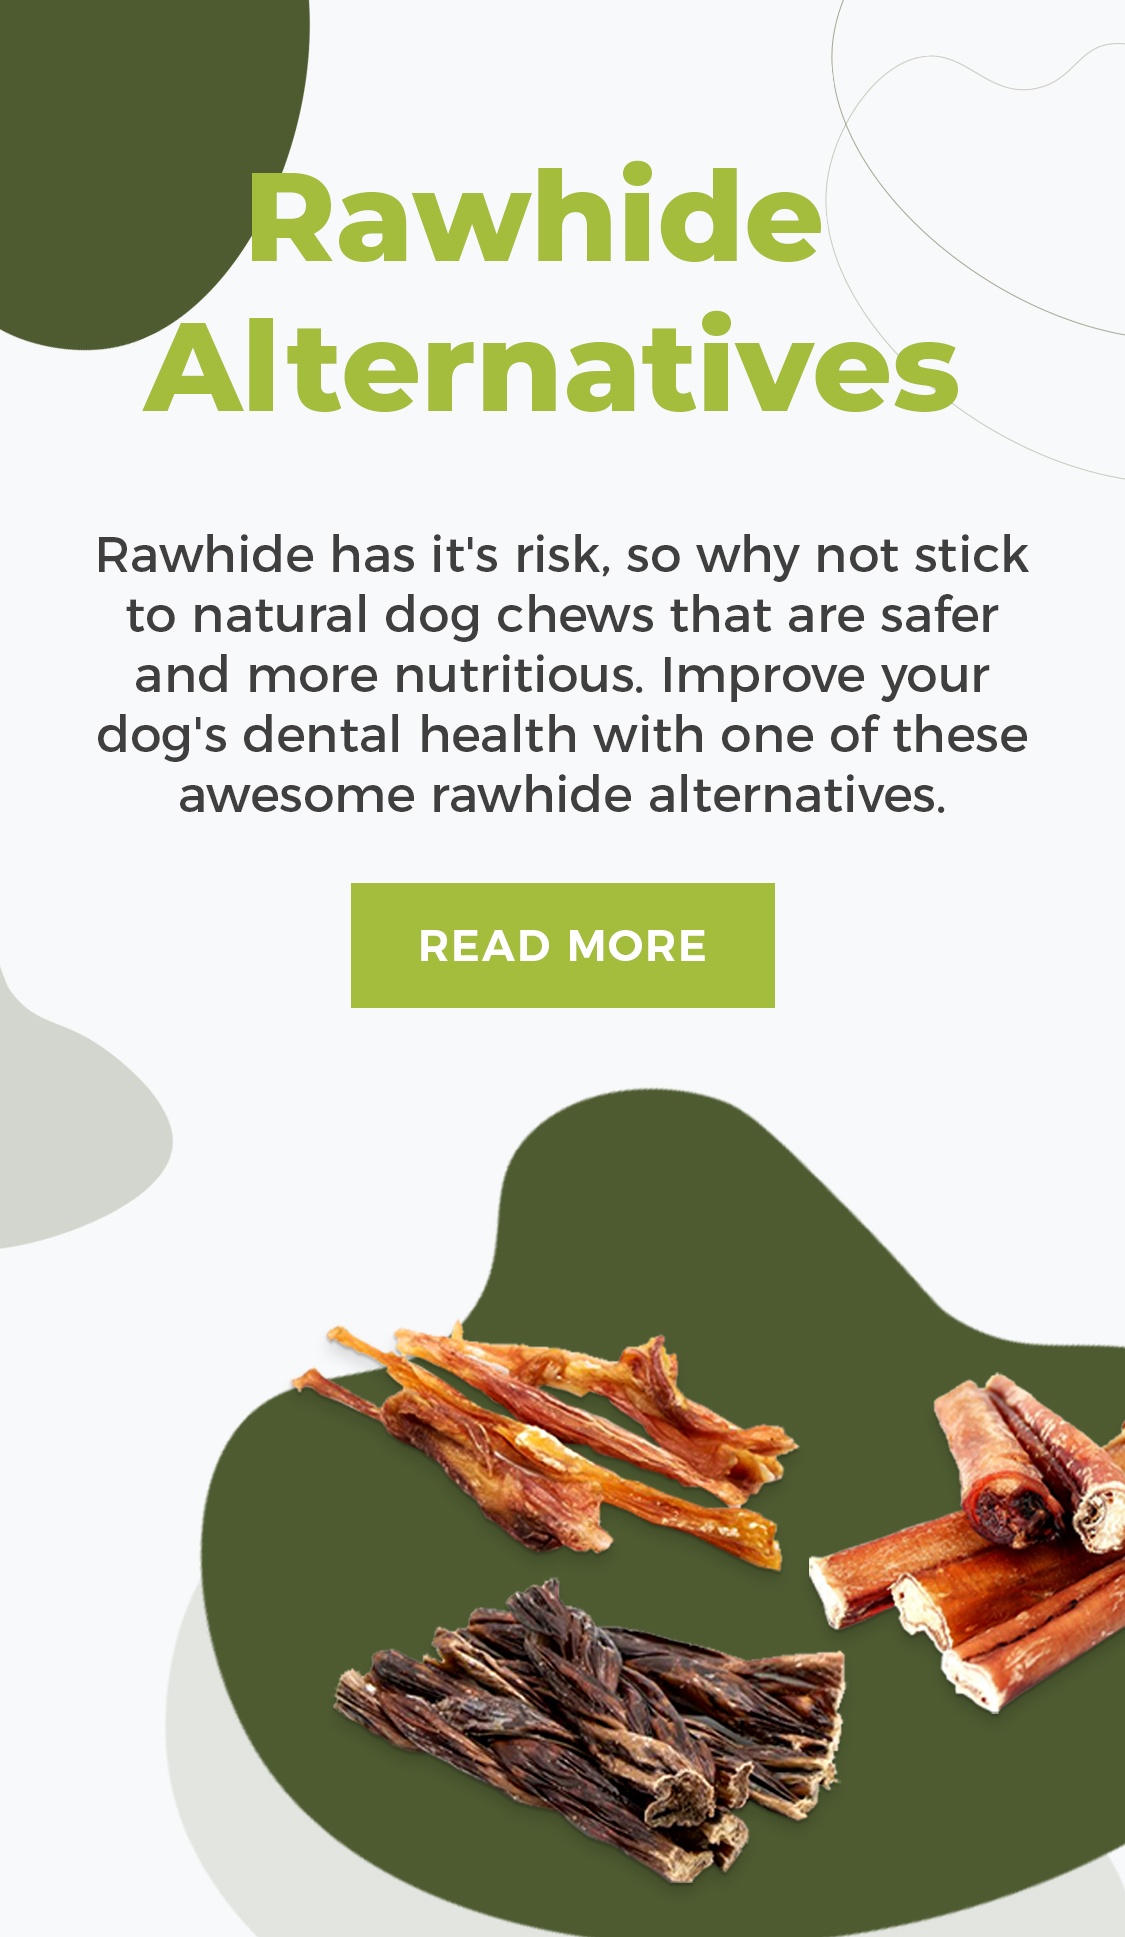 are pig ears better for a small greek domestic dog than rawhide ears